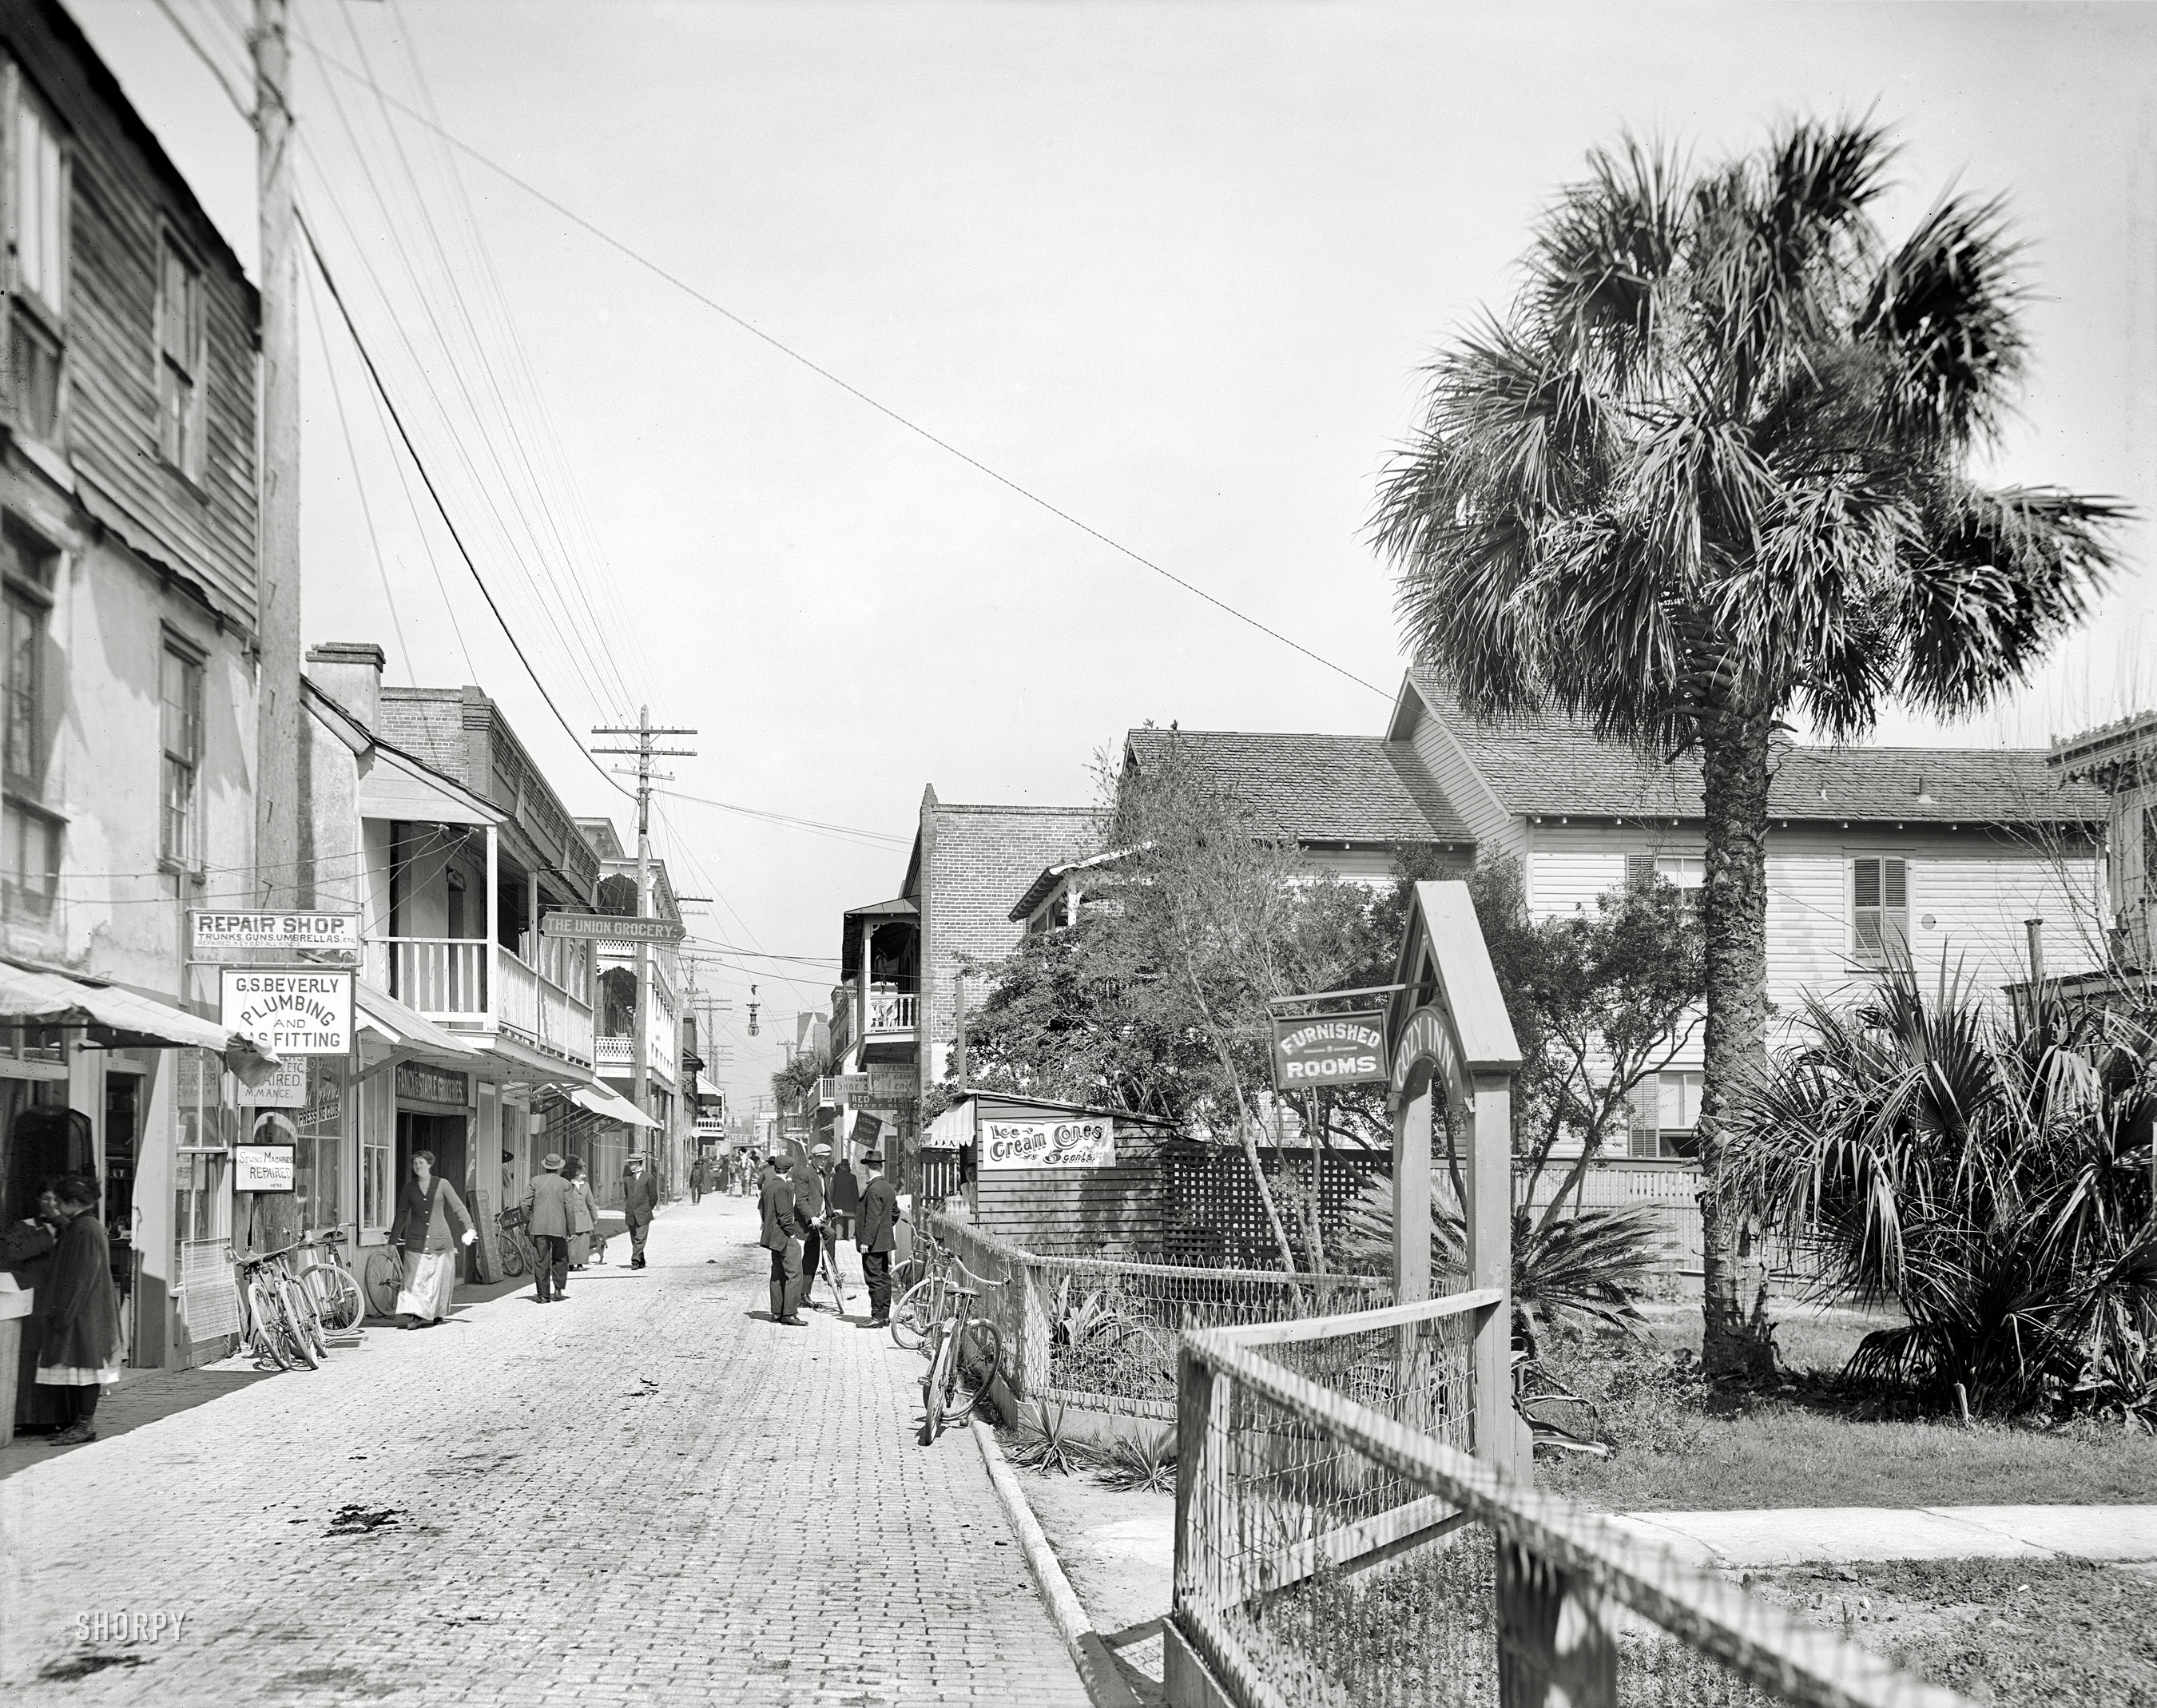 St. Augustine, Florida, circa 1908. "St. George Street." Where ice cream cones and gun-trunk-umbrella-sewing machine repairs are just a few steps apart. 8x10 inch dry plate glass negative, Detroit Publishing Company. View full size.